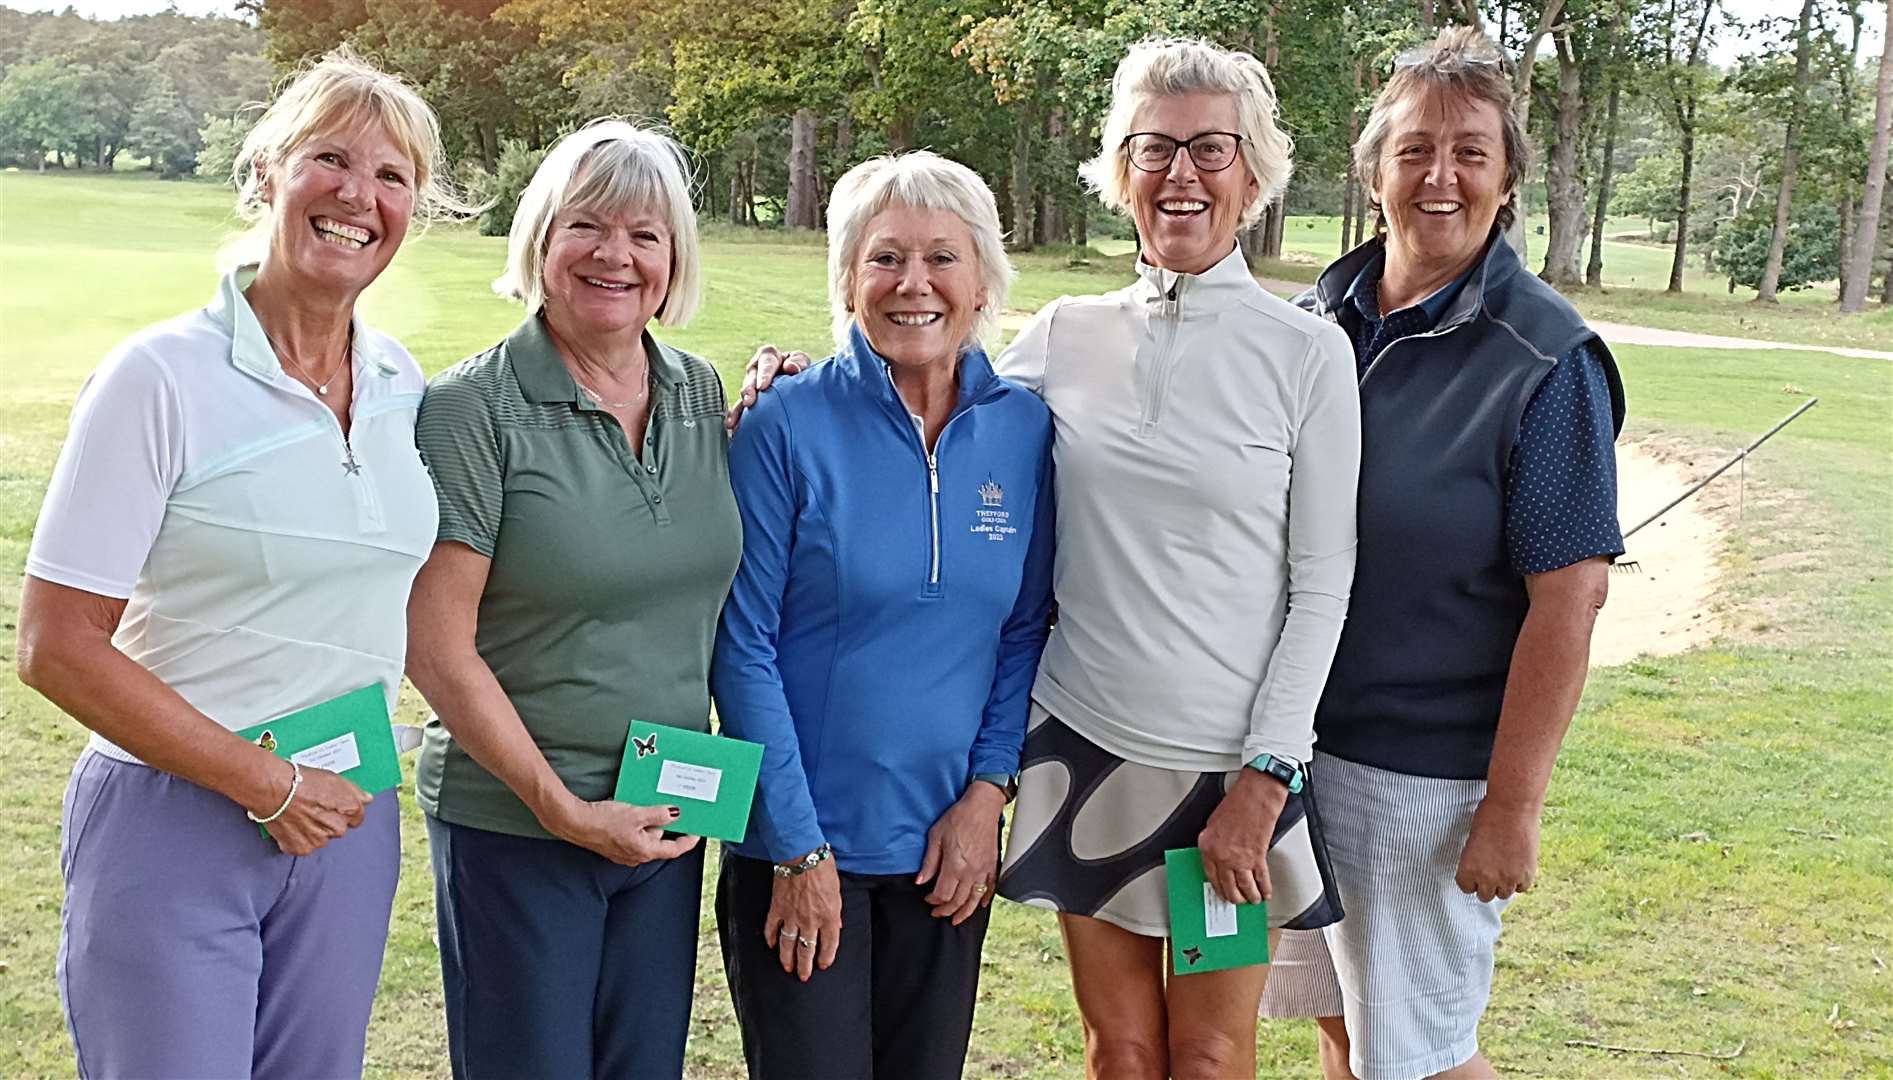 The winning ladies' AmAm team at Thetford Golf Club from Warley Park and Chelmsford Picture: Gill Welham